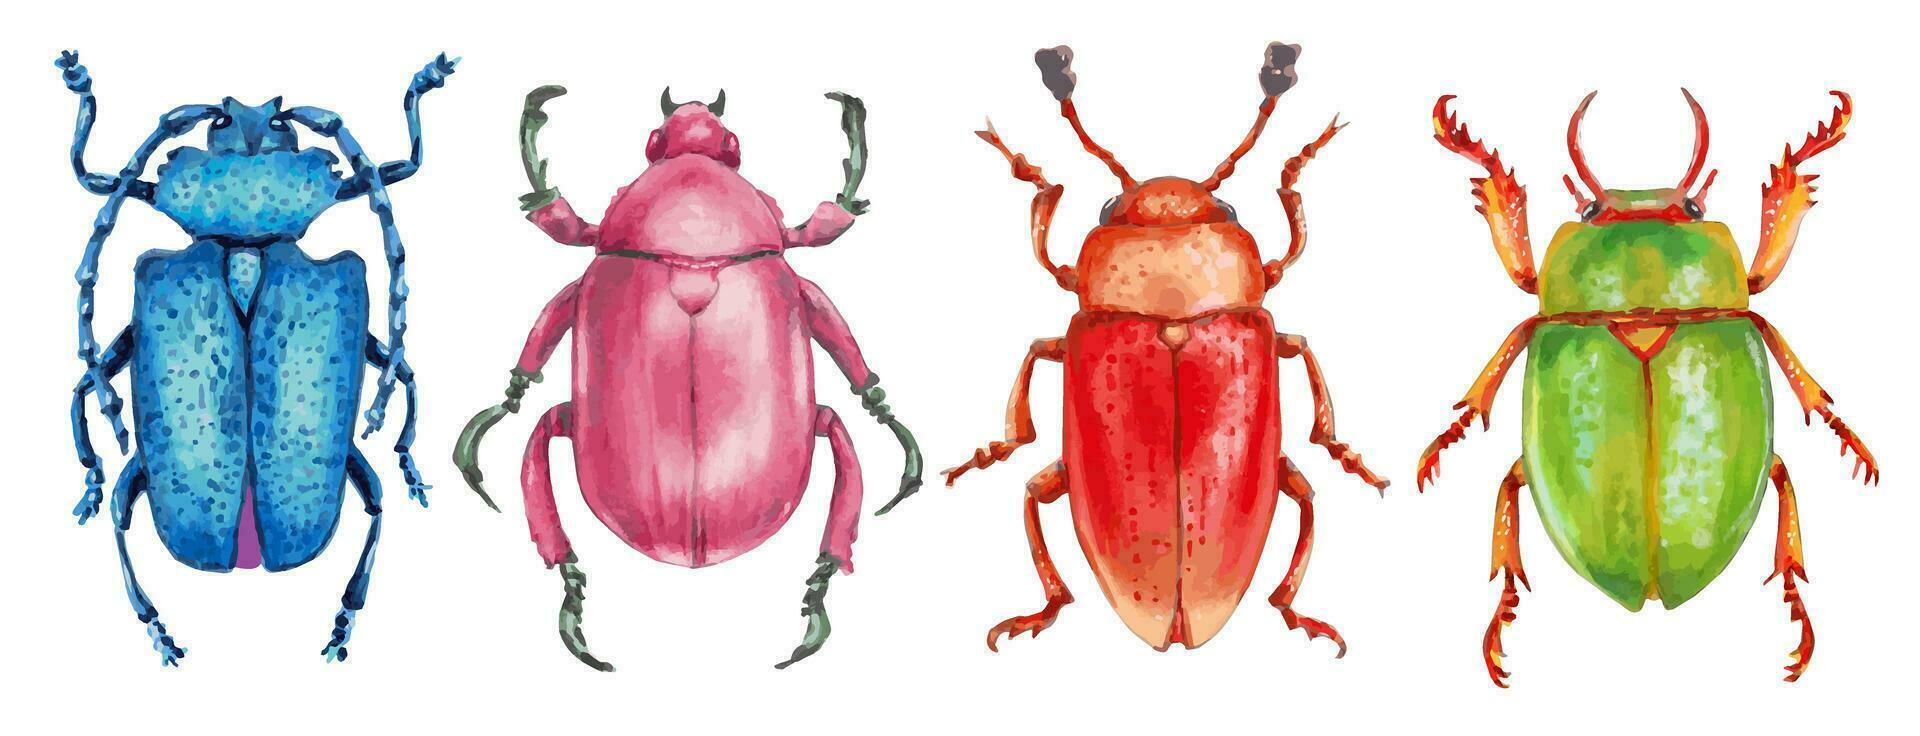 Set of insect beetles. Animal beetles are blue, pink, orange, green. Glossy surface. Entomology, the study of insects. Hand drawn illustration with markers. vector